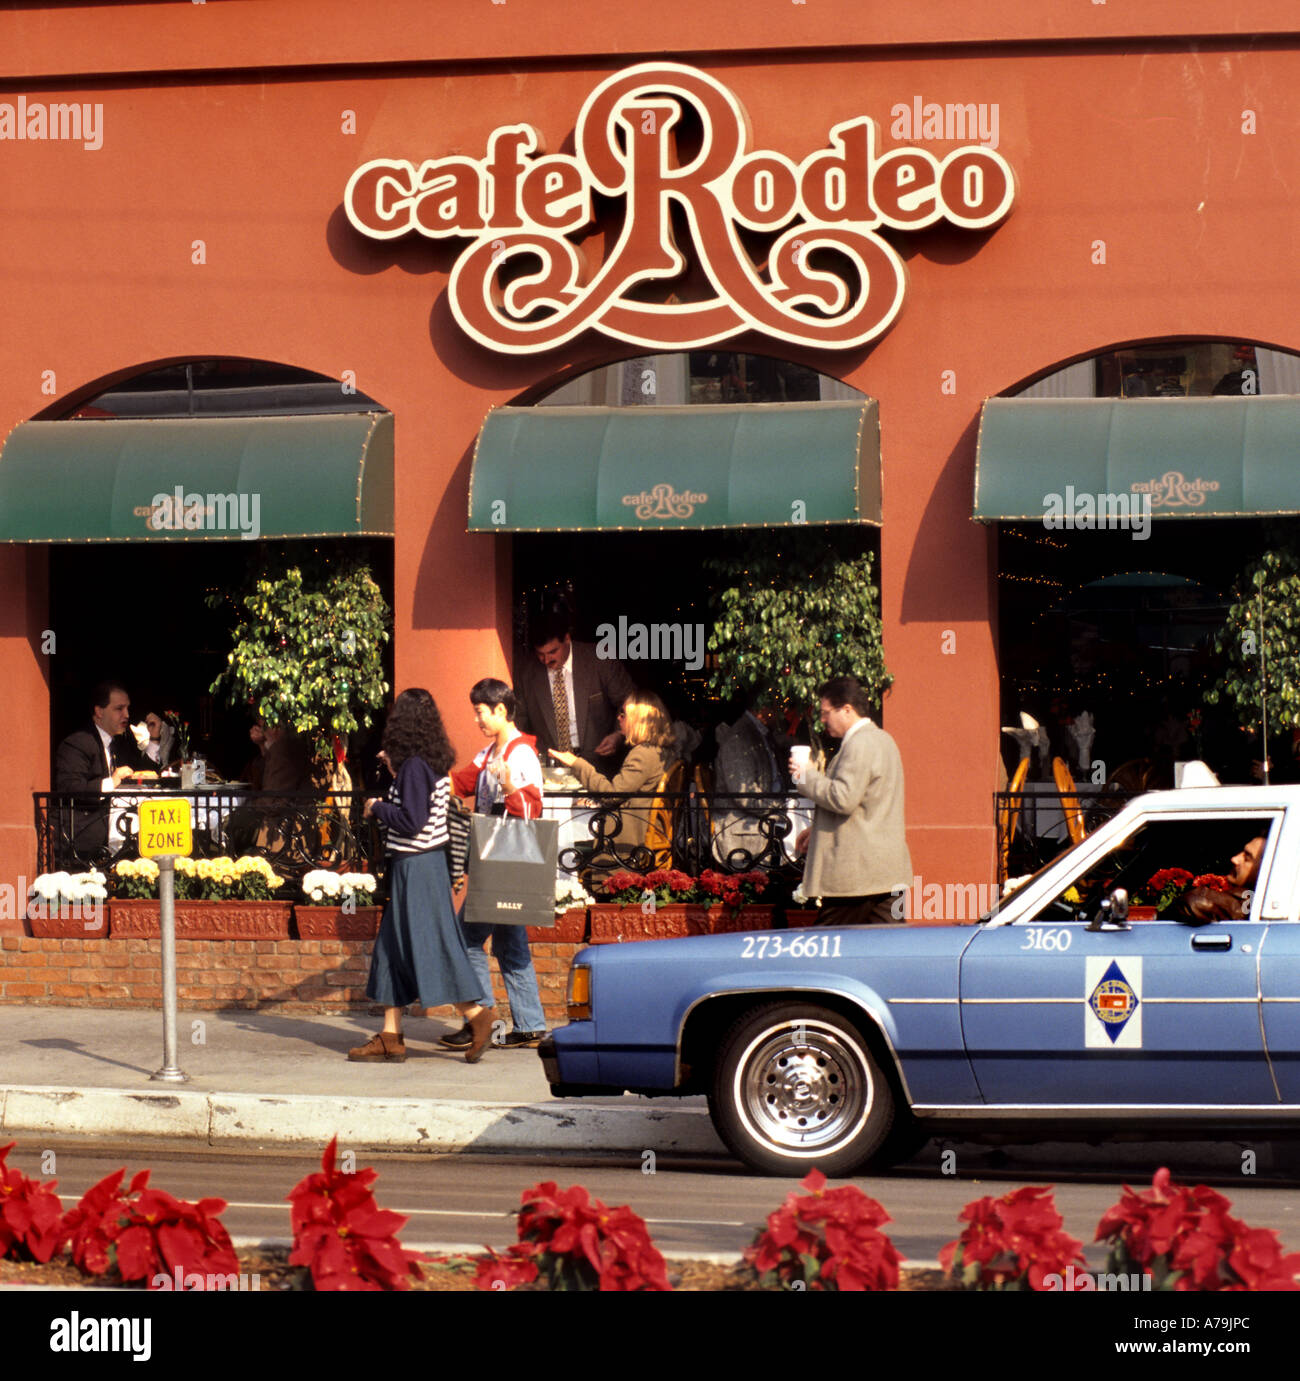 Cafe Rodeo Drive famous three-block long stretch of boutiques and